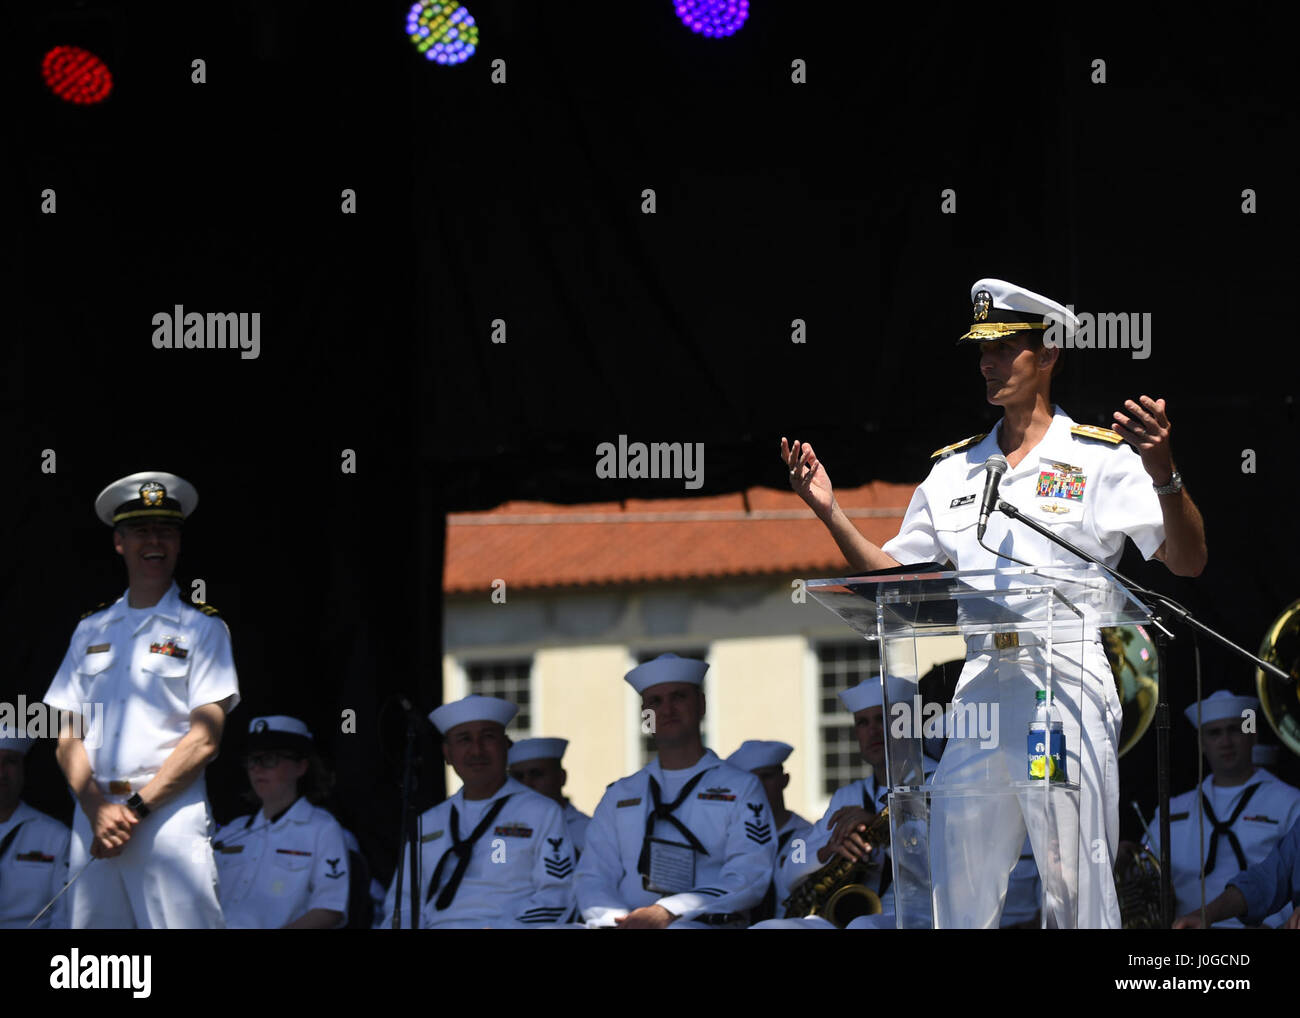 170401-N-LQ926-506 BILOXI, Miss. (April 1, 2017) Rear Admiral Timothy C. Gallaudet, commander, Naval Meteorology and Oceanography Command, recognizes crew members of the Virginia-class fast-attack submarine USS Mississippi (SSN 782) during the official commencement proclamation ceremony for the Mississippi Bicentennial/Navy Week celebration at Centennial Plaza, Gulfport Mississippi. Gulfport/Biloxi is one of select regions to host a 2017 Navy Week, a week dedicated to raise U.S. Navy awareness in through local outreach, community service and exhibitions. (U.S. Navy photo by Mass Communication  Stock Photo